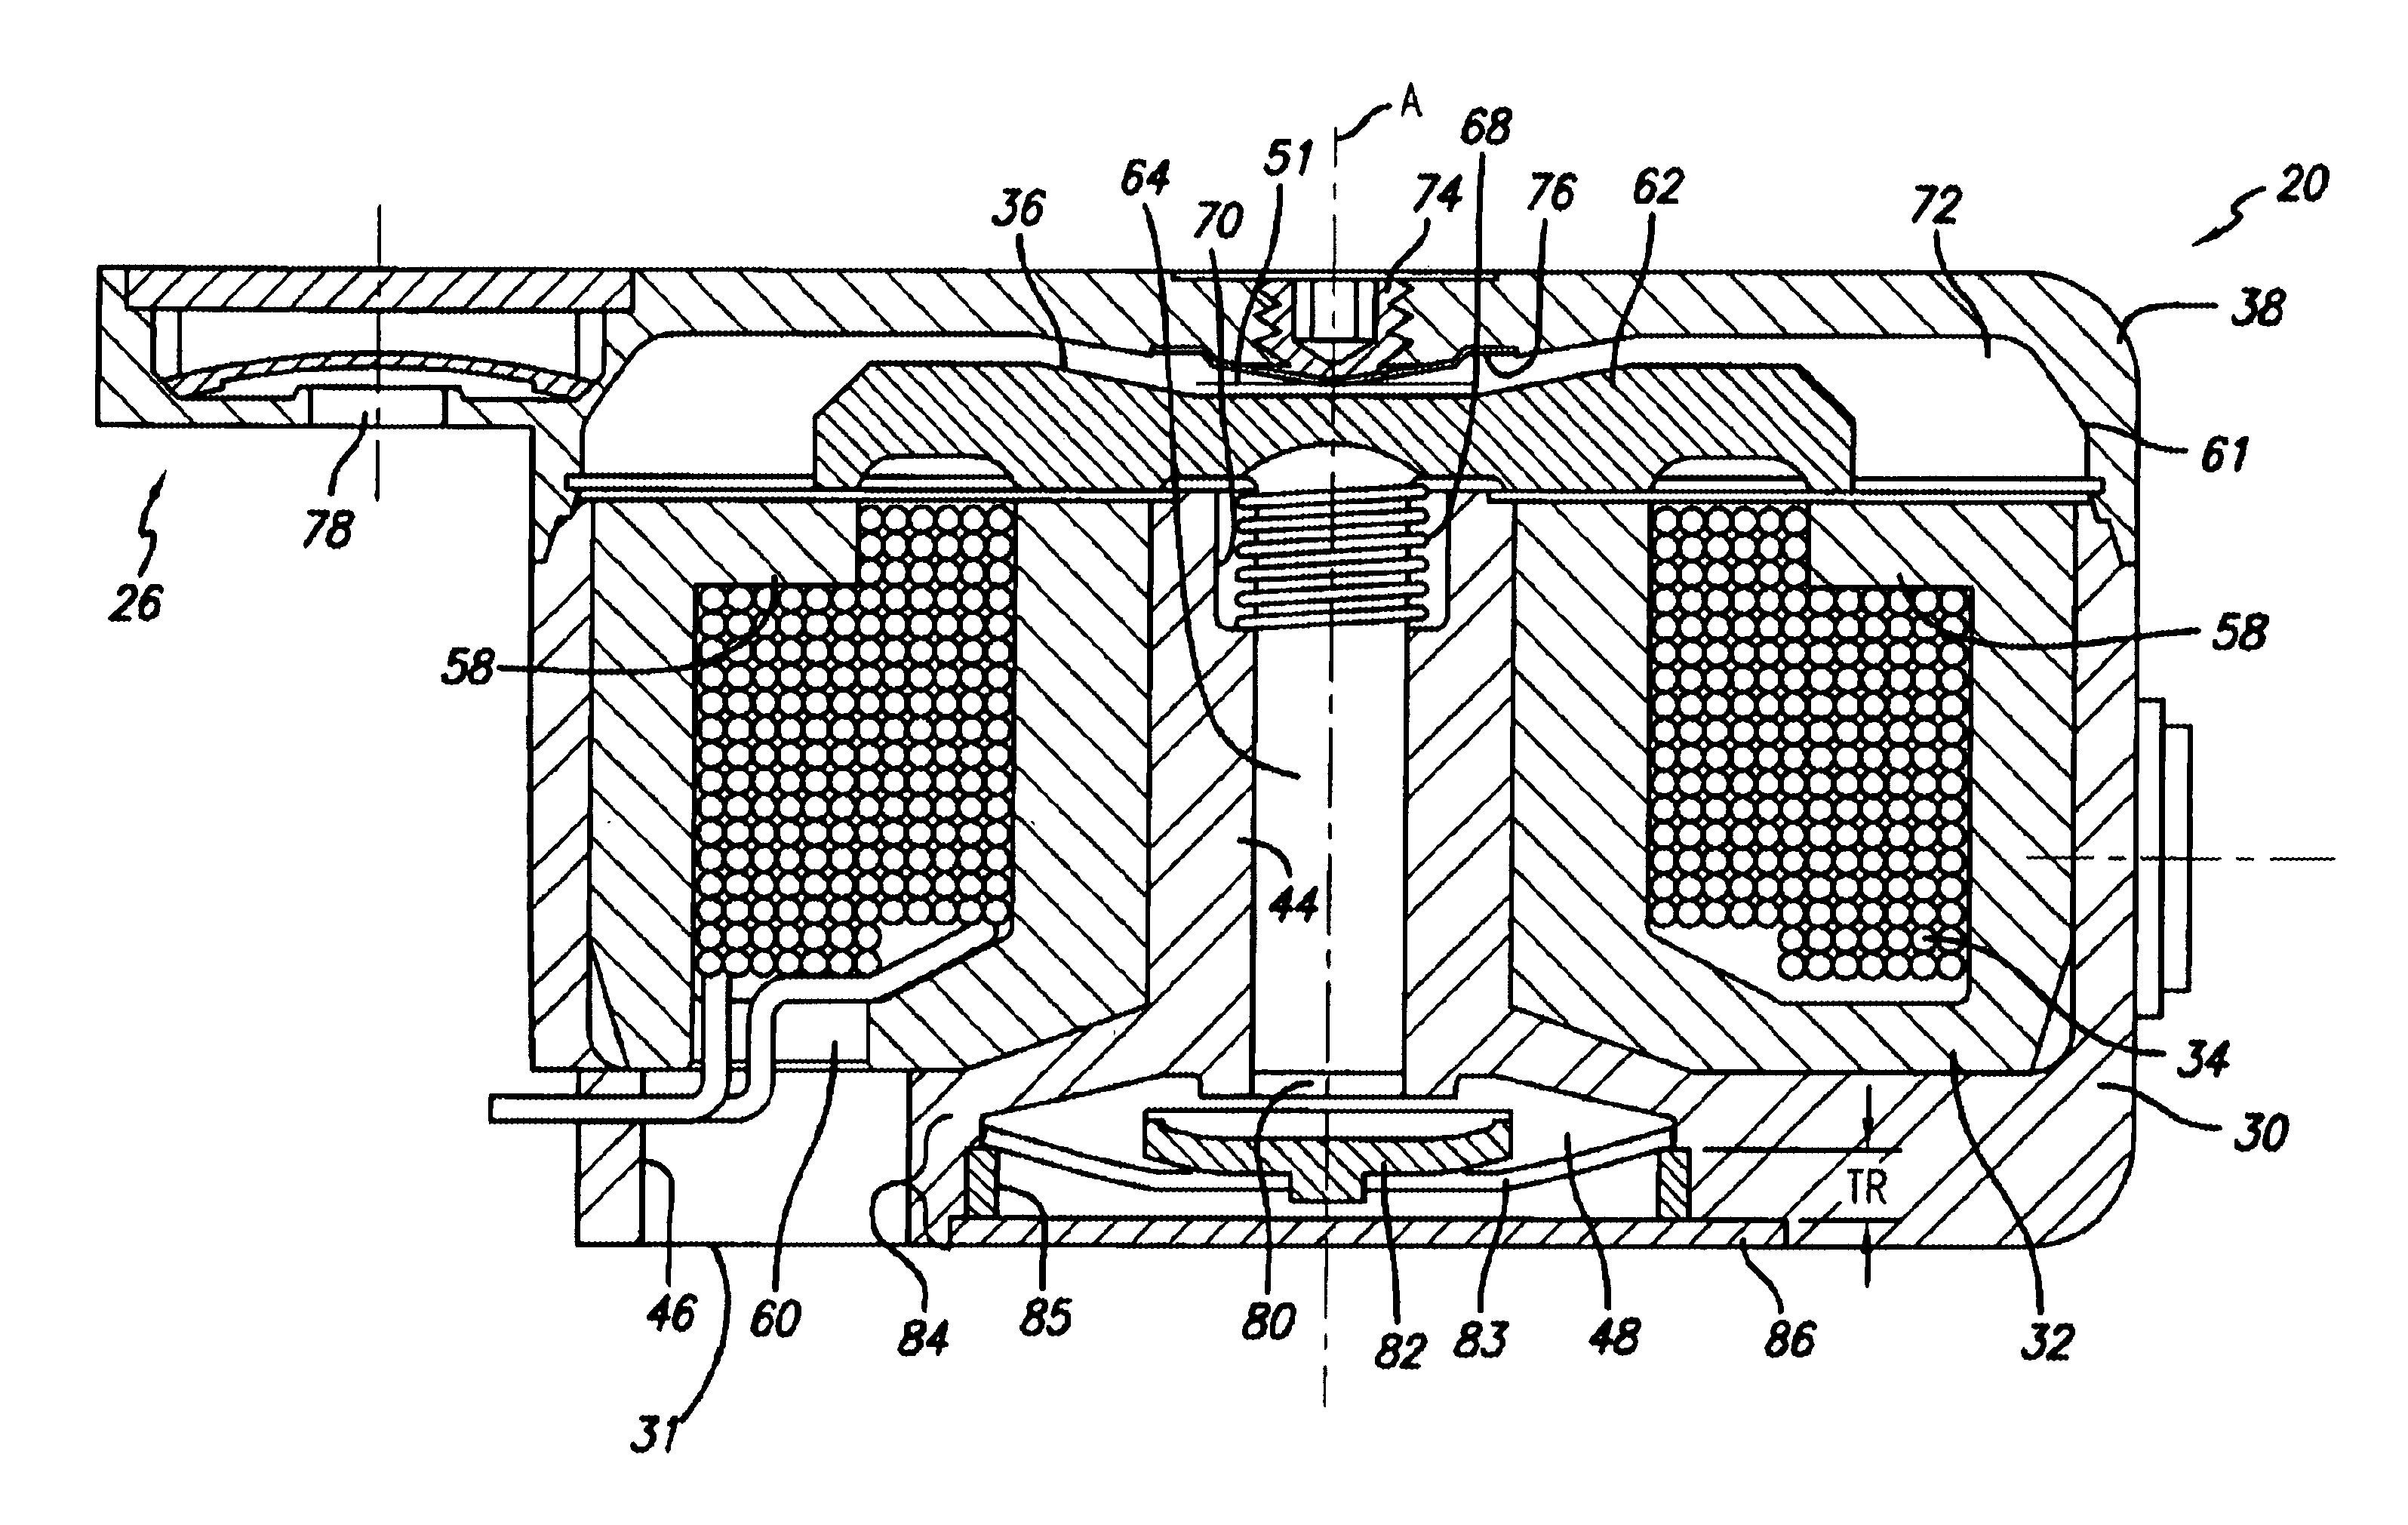 Infusion device and driving mechanism and process for same with actuator for multiple infusion uses